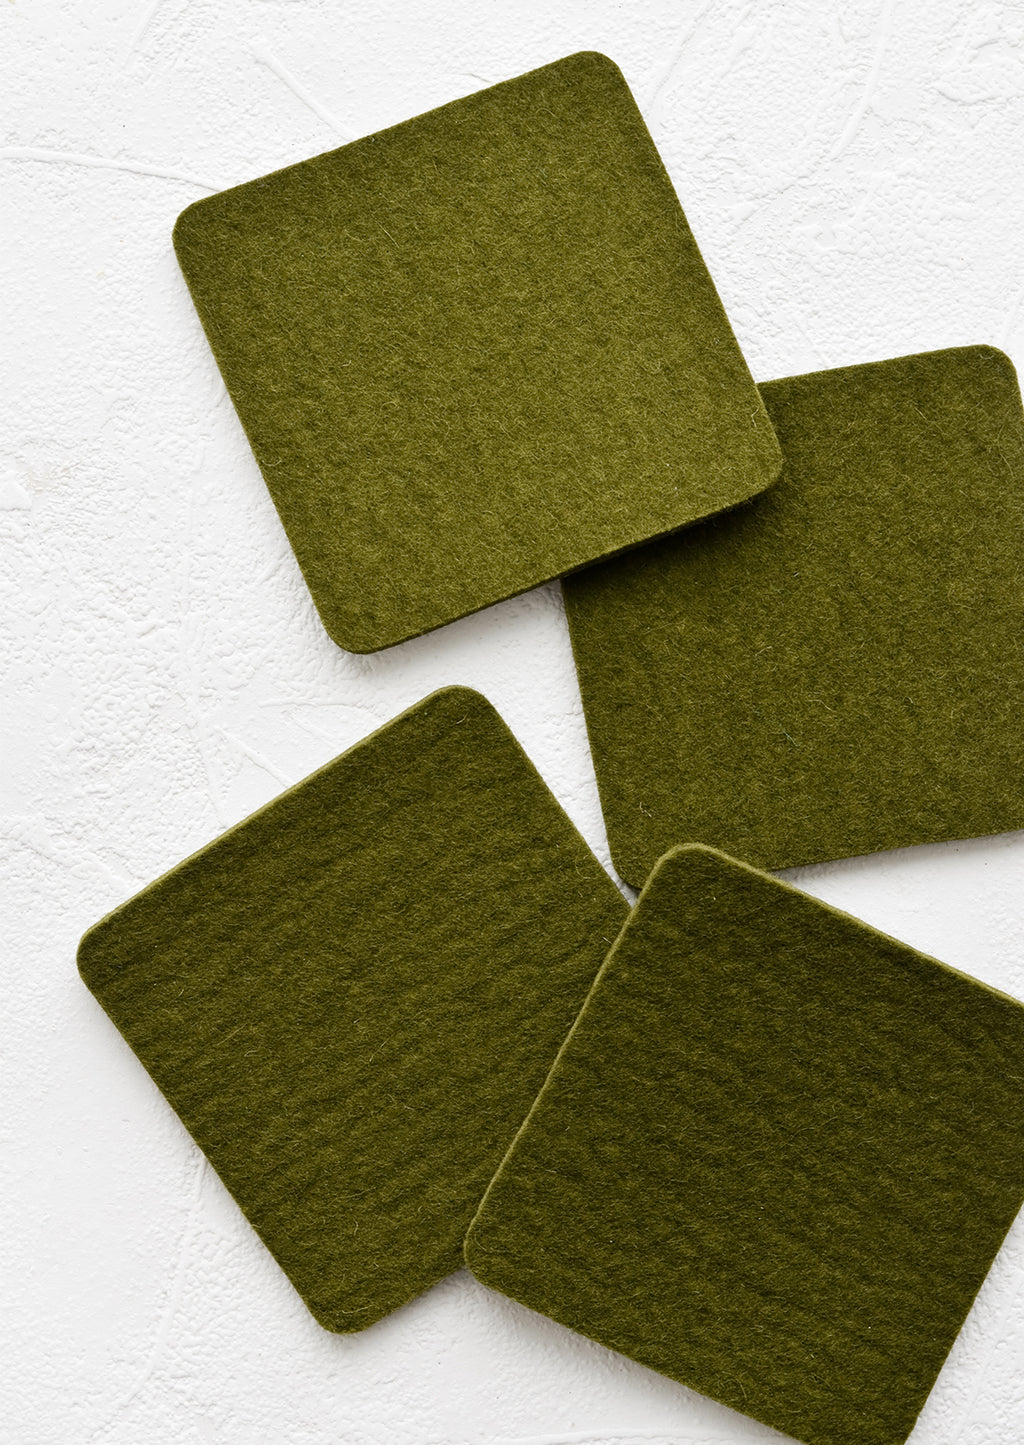 Army: A set of four square merino wool coasters in army green.